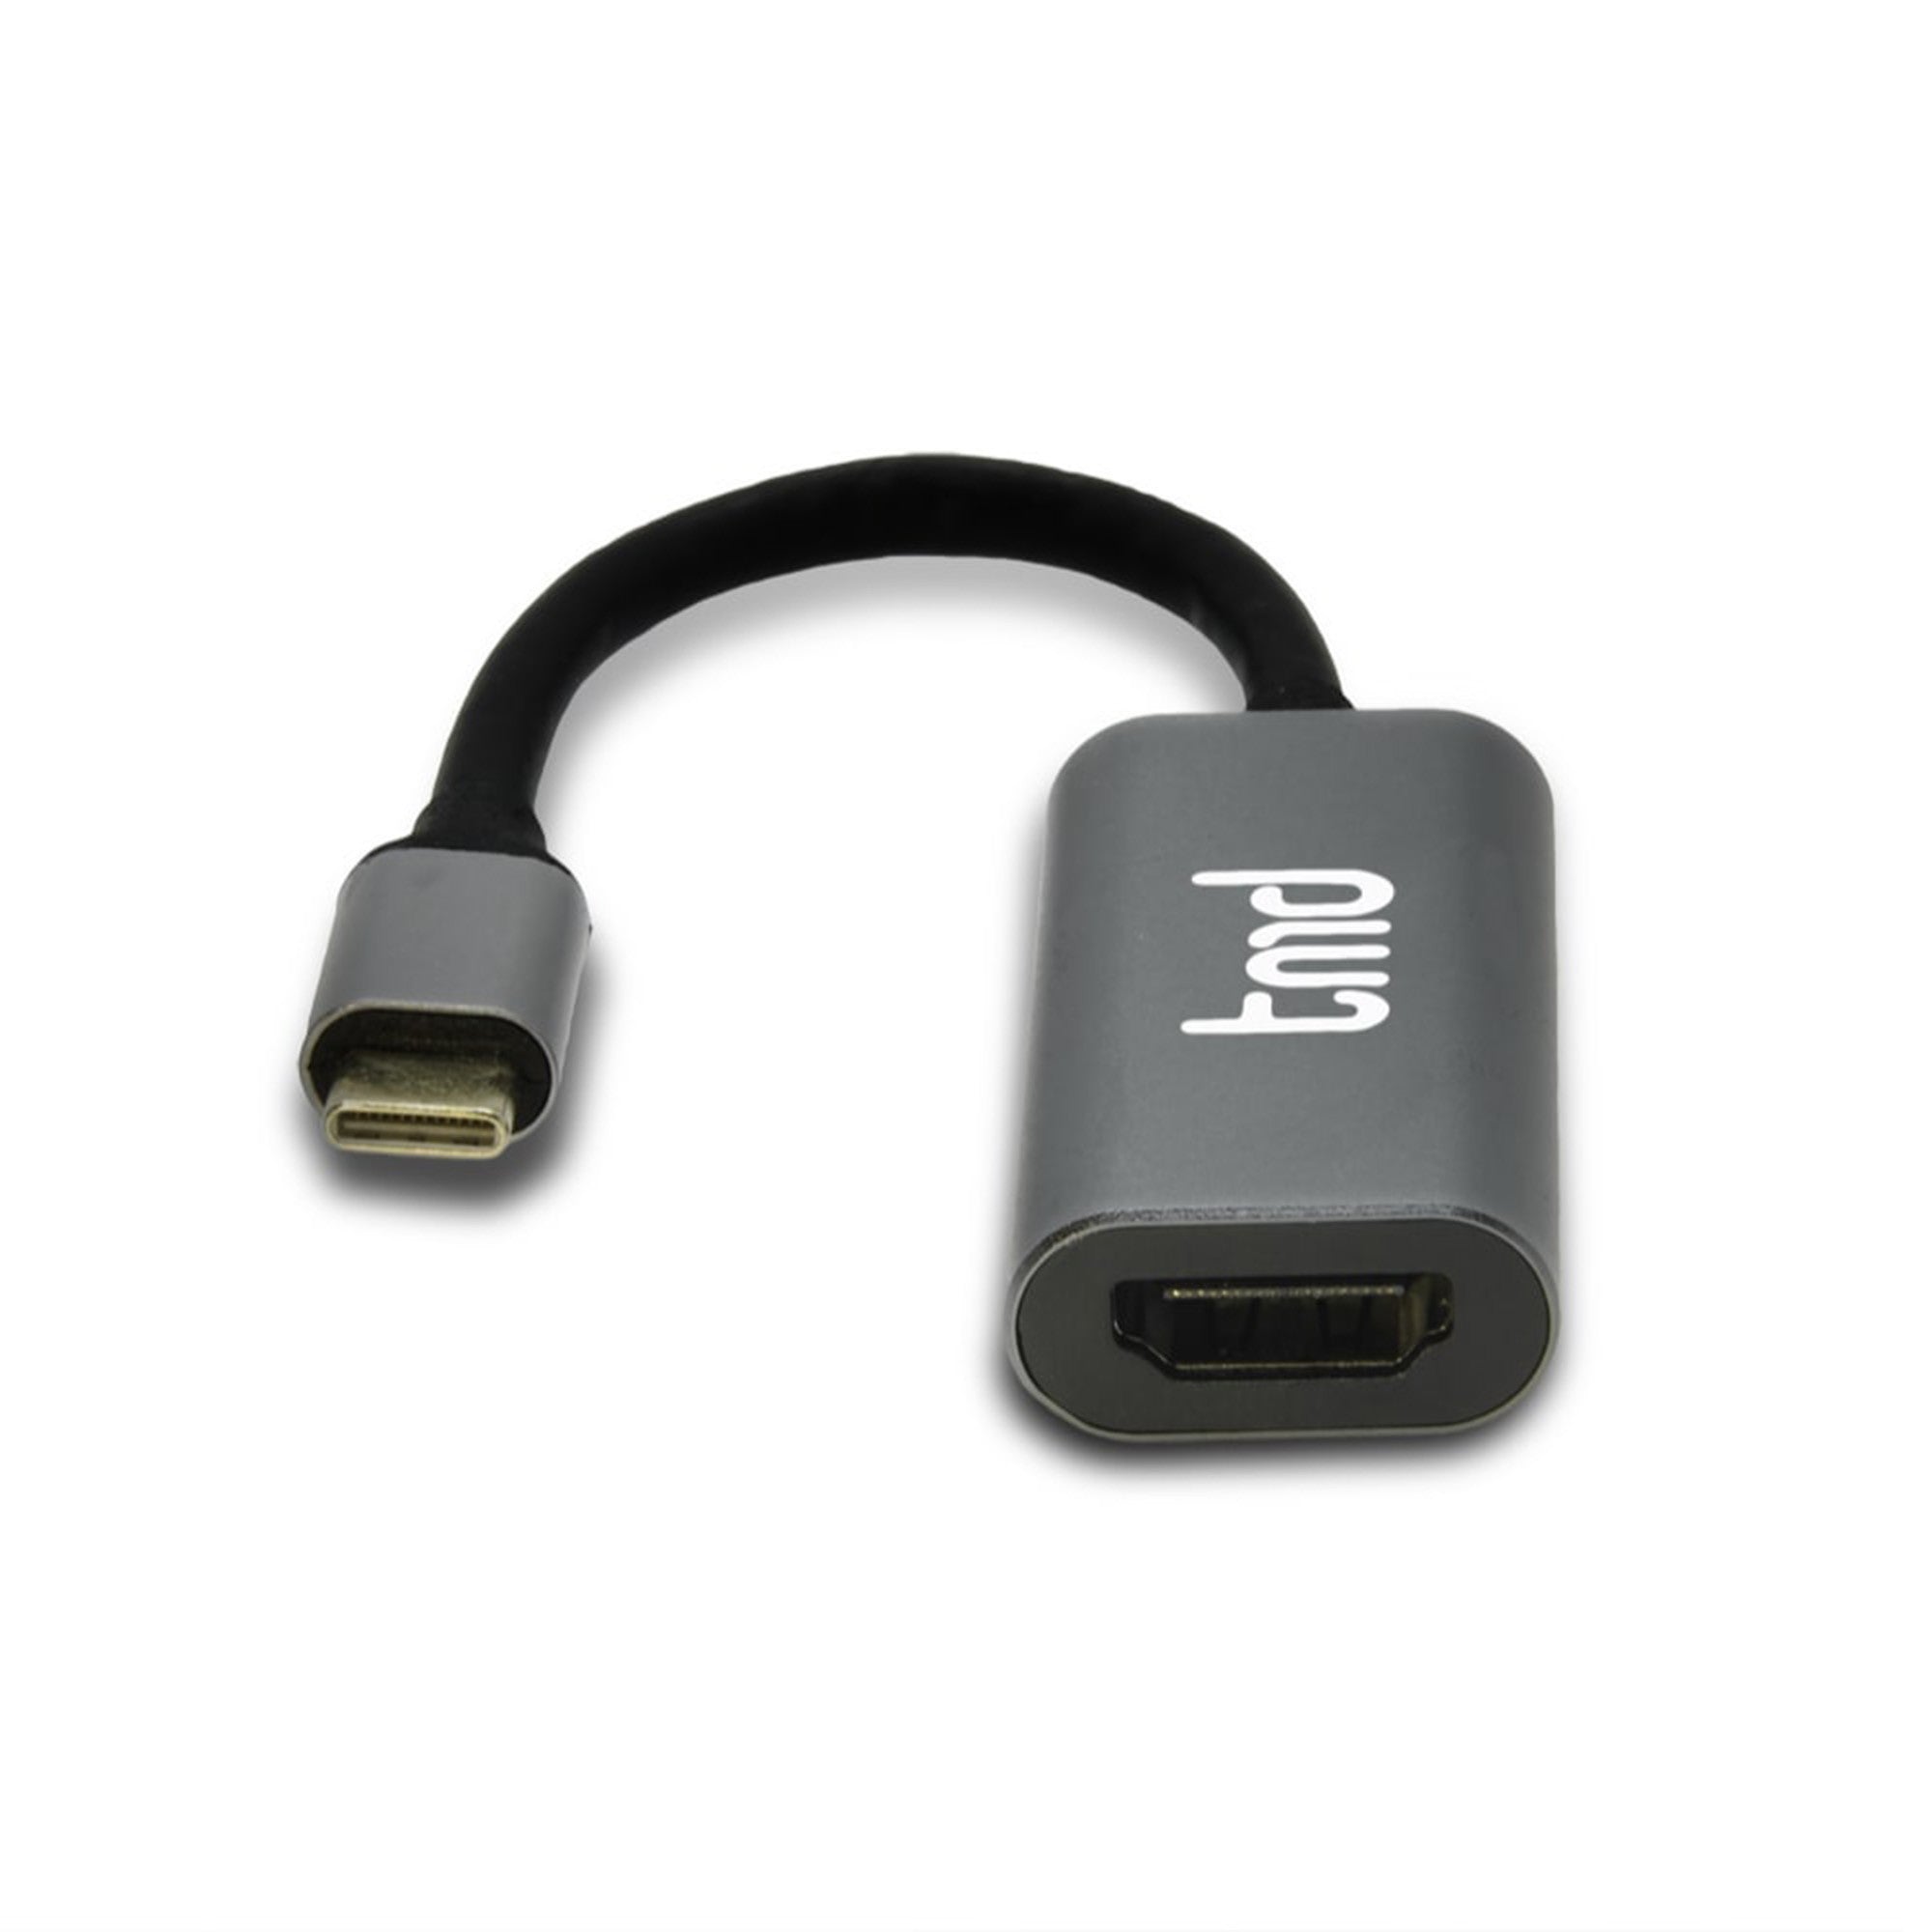 tmd USB-C to HDMI Adapter - Grey - 15-10486